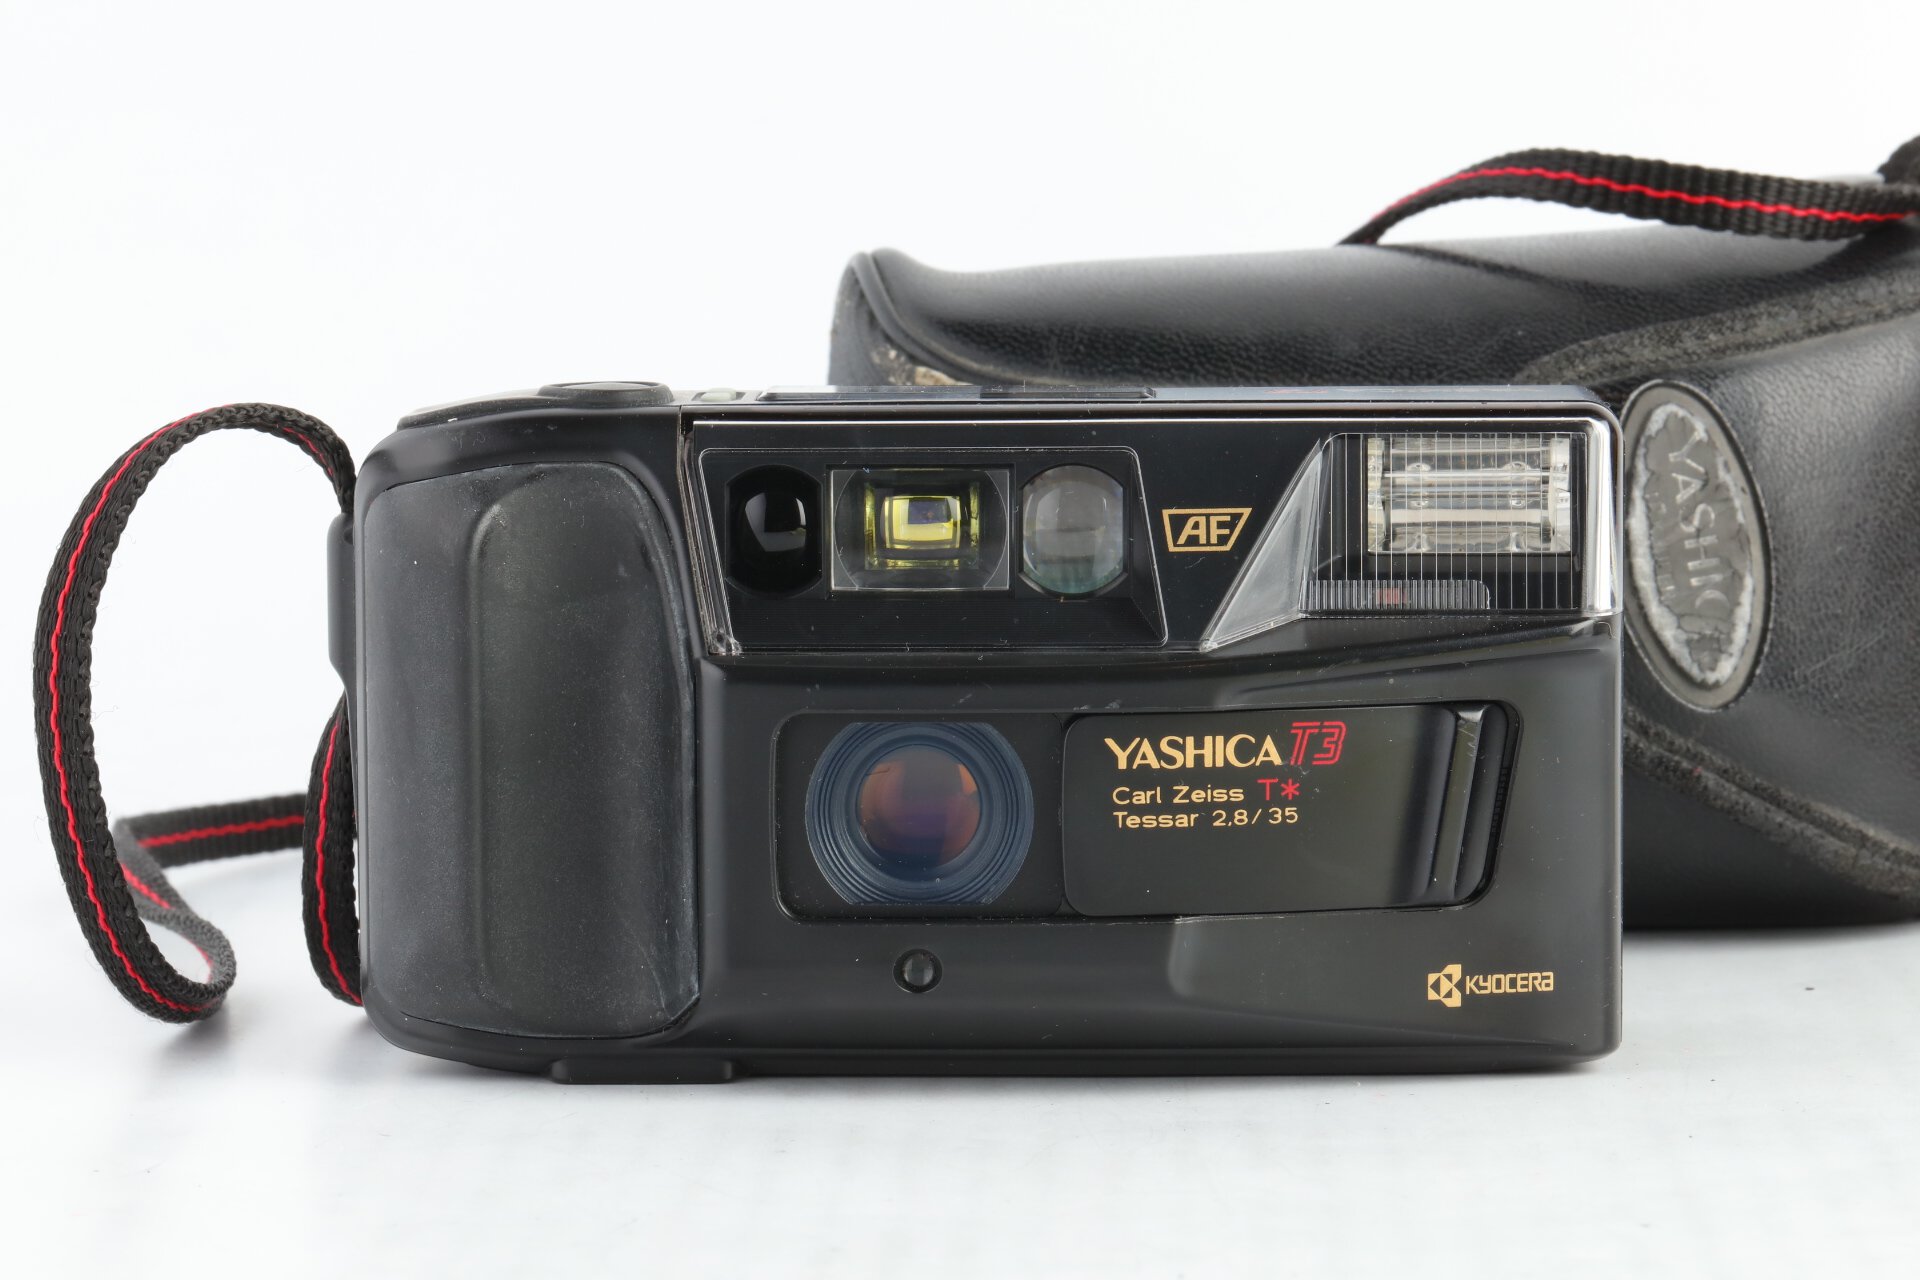 Yashica T3 Carl Zeiss Tessar T* 2,8/35mm